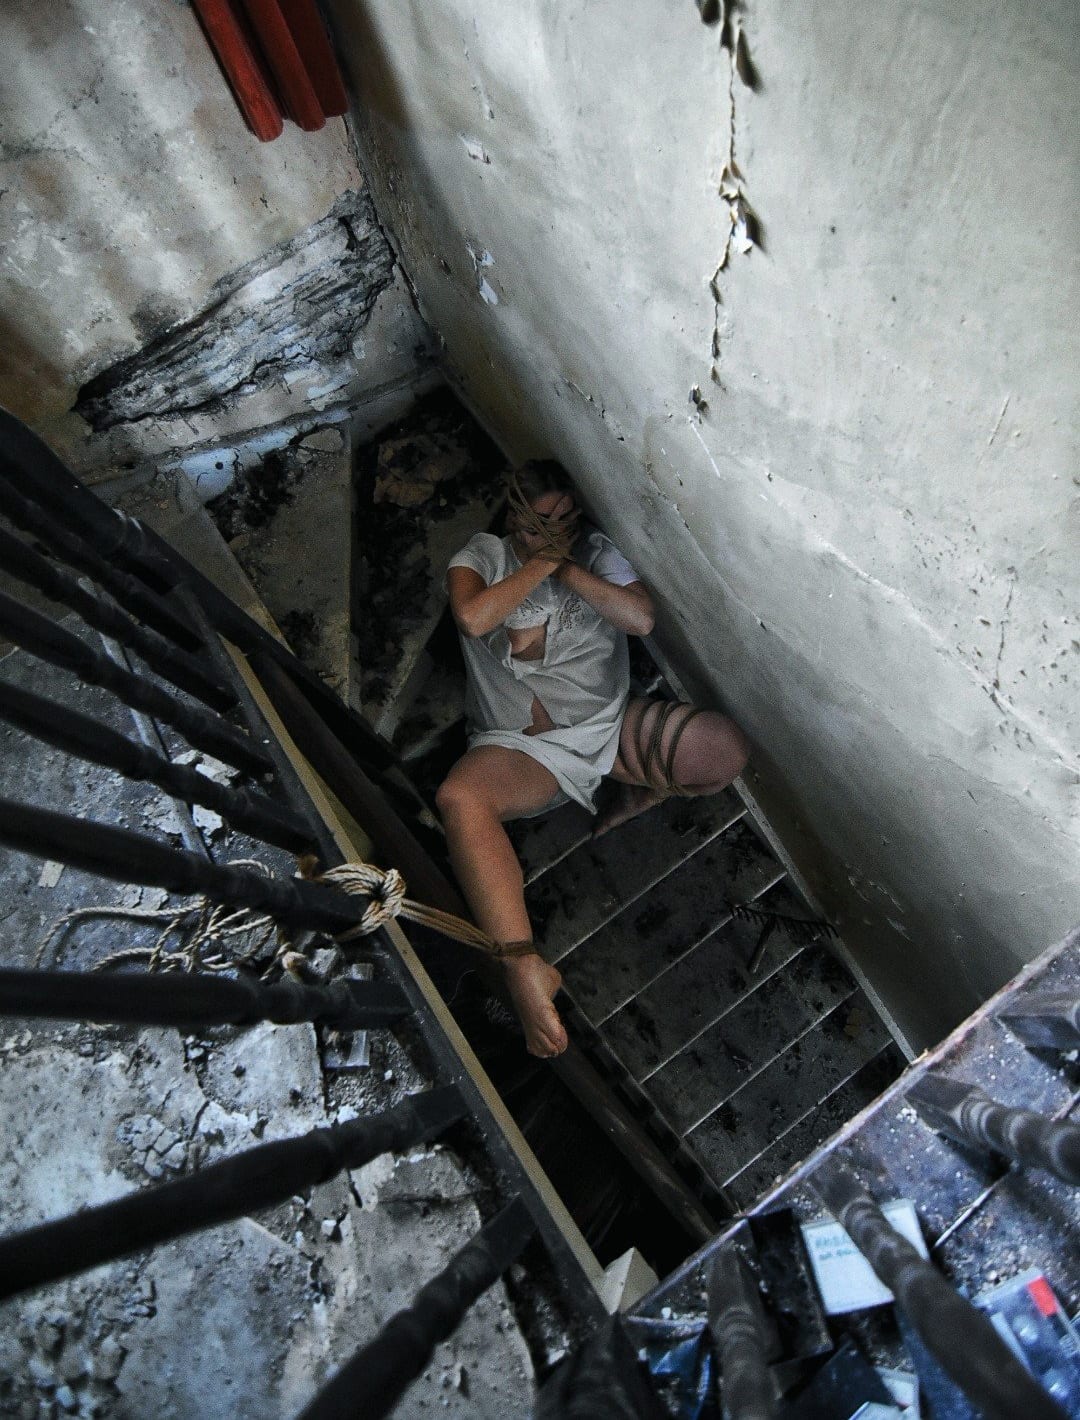 BDSM is a game header shows lady in a torn white cotton nightdress, bound on crumbing stairs.